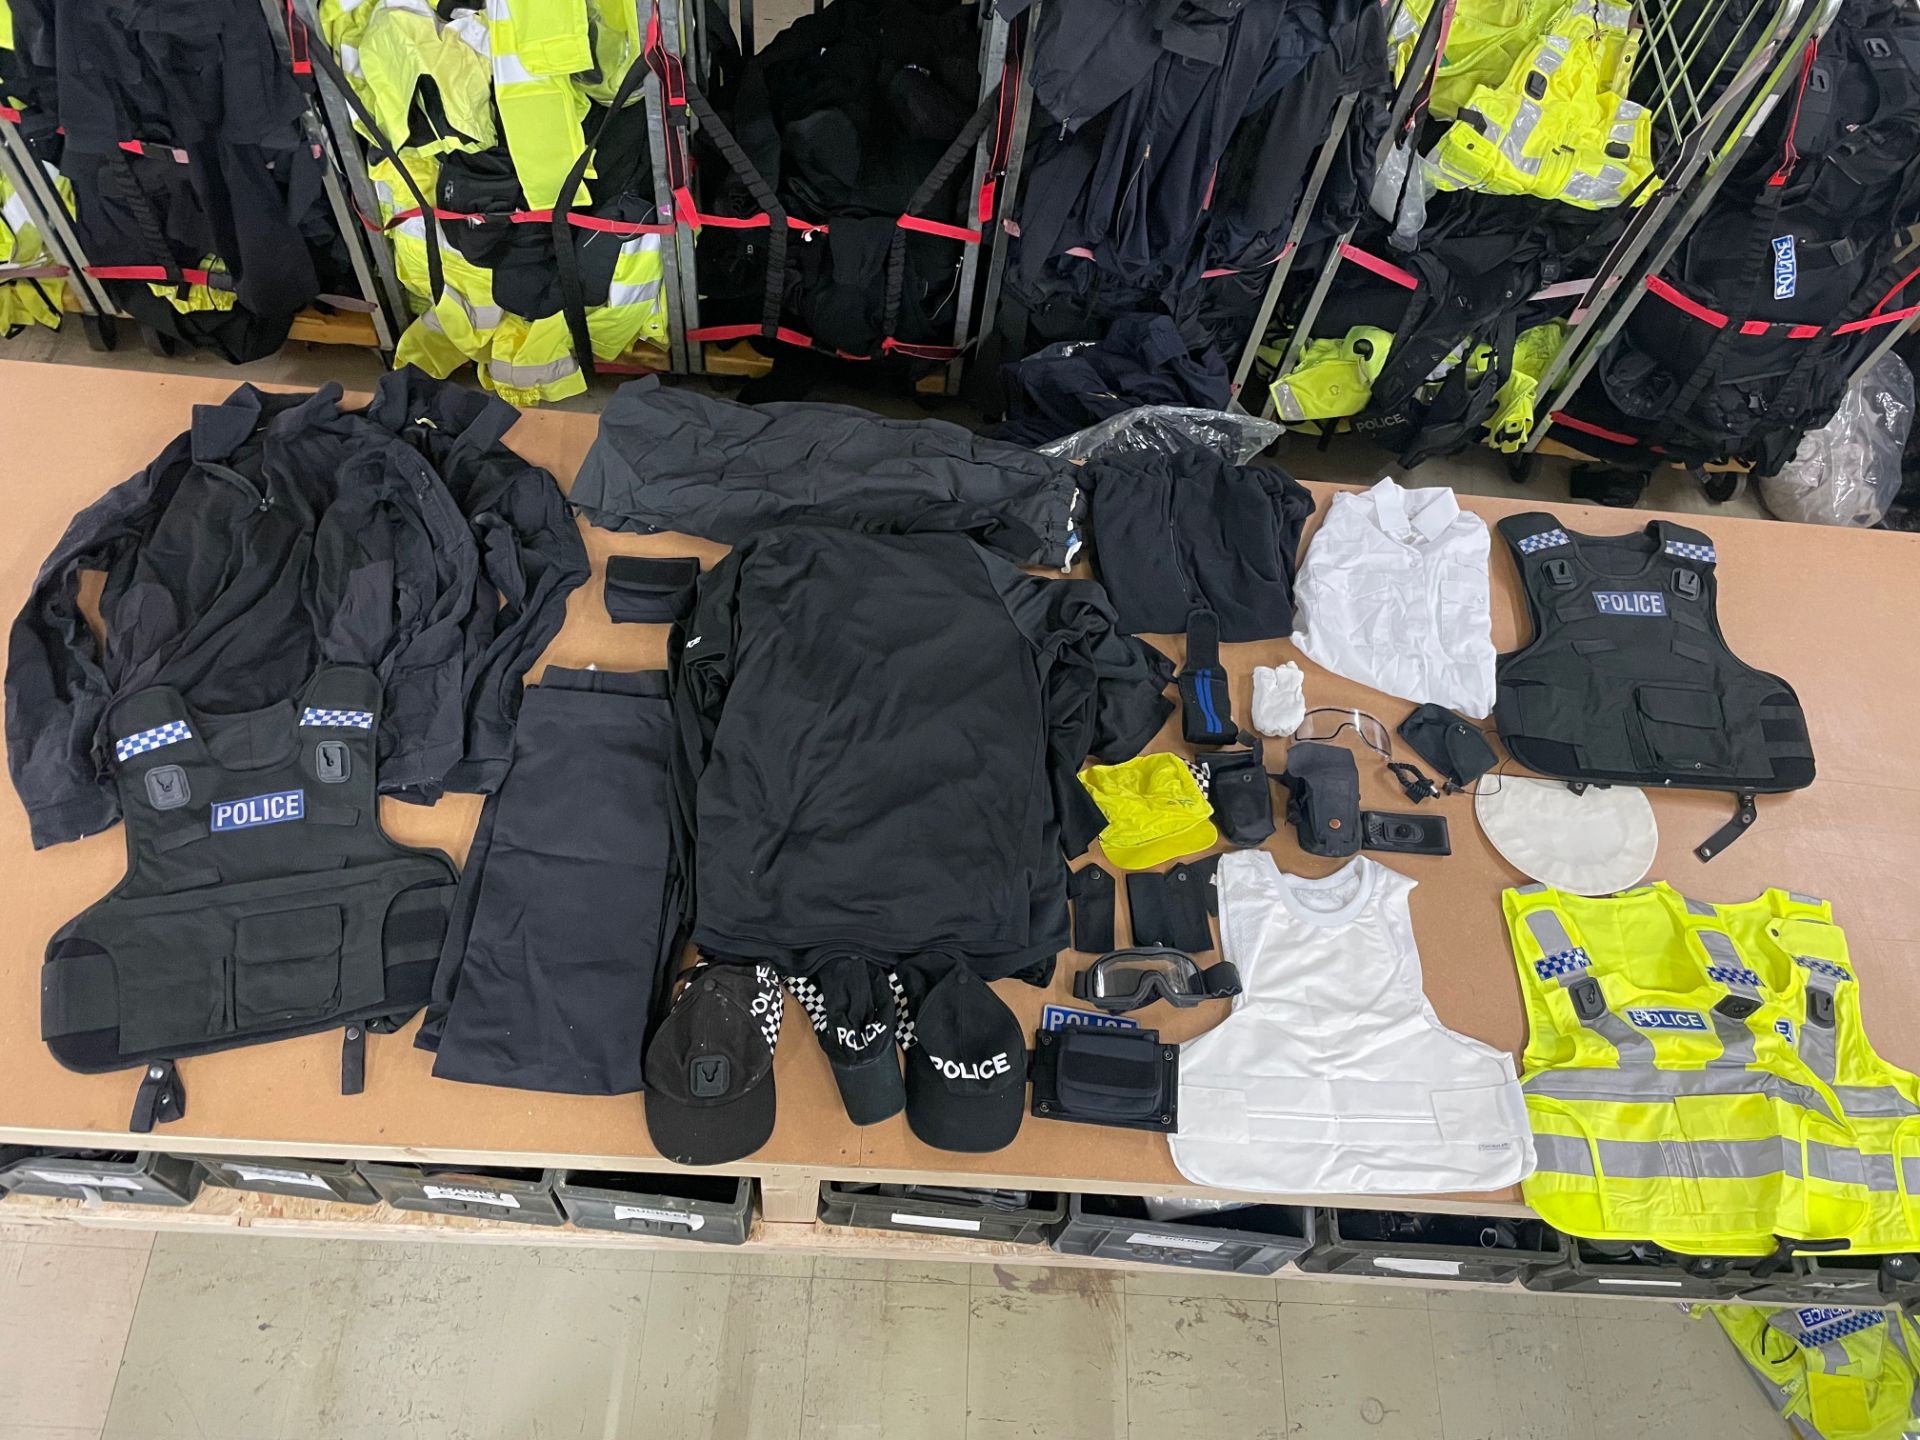 5 X BAGS STUFFED WITH EX POLICE UNIFORM CLOTHING & ACCESSORIES - RRP £1375.00 - NO VAT ON HAMMER - Image 9 of 12